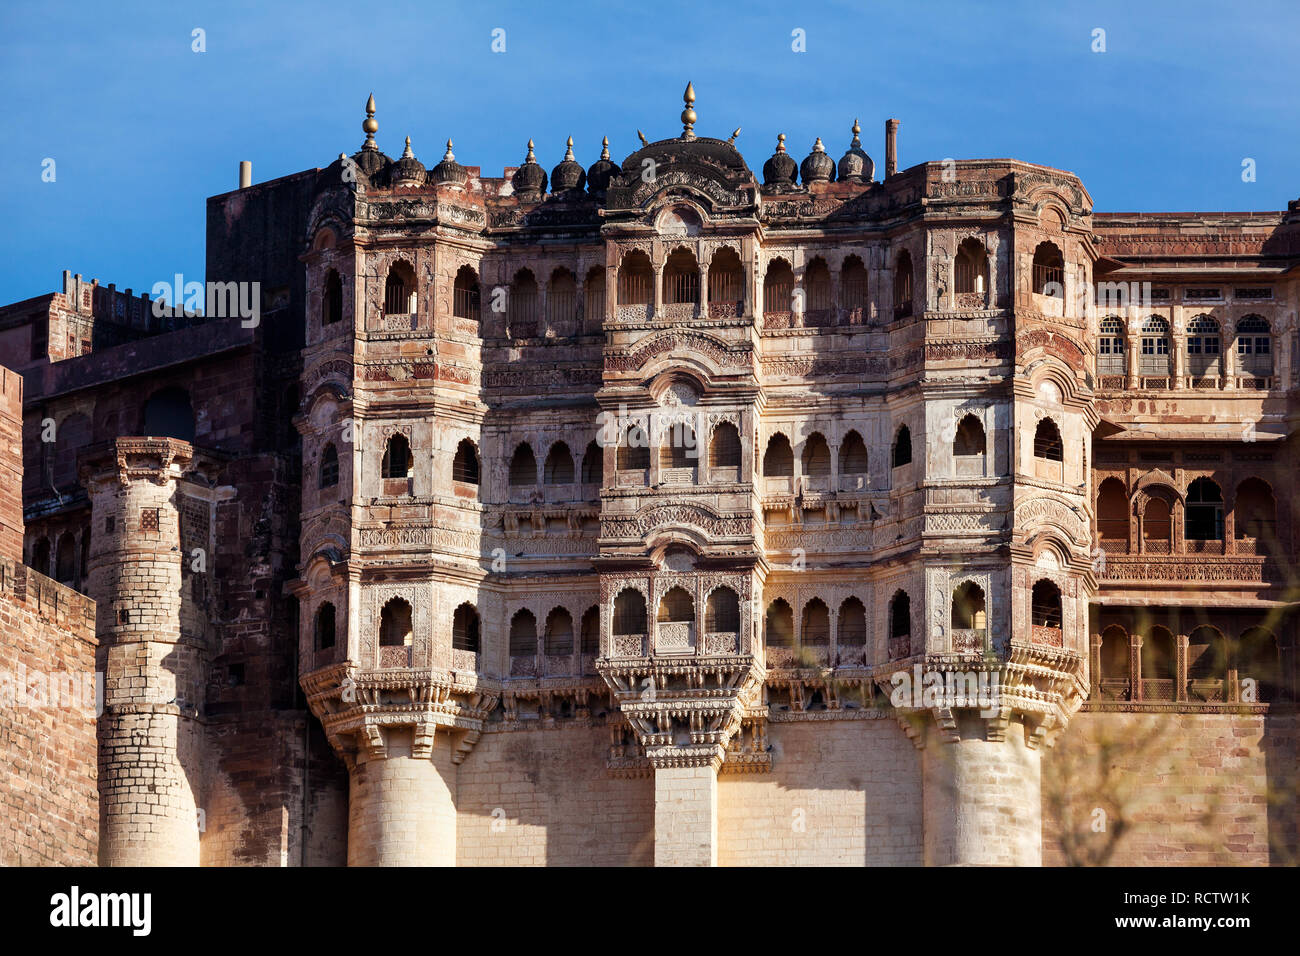 Mehrangarh fort with towers at blue sky in Jodhpur, Rajasthan, India Stock Photo